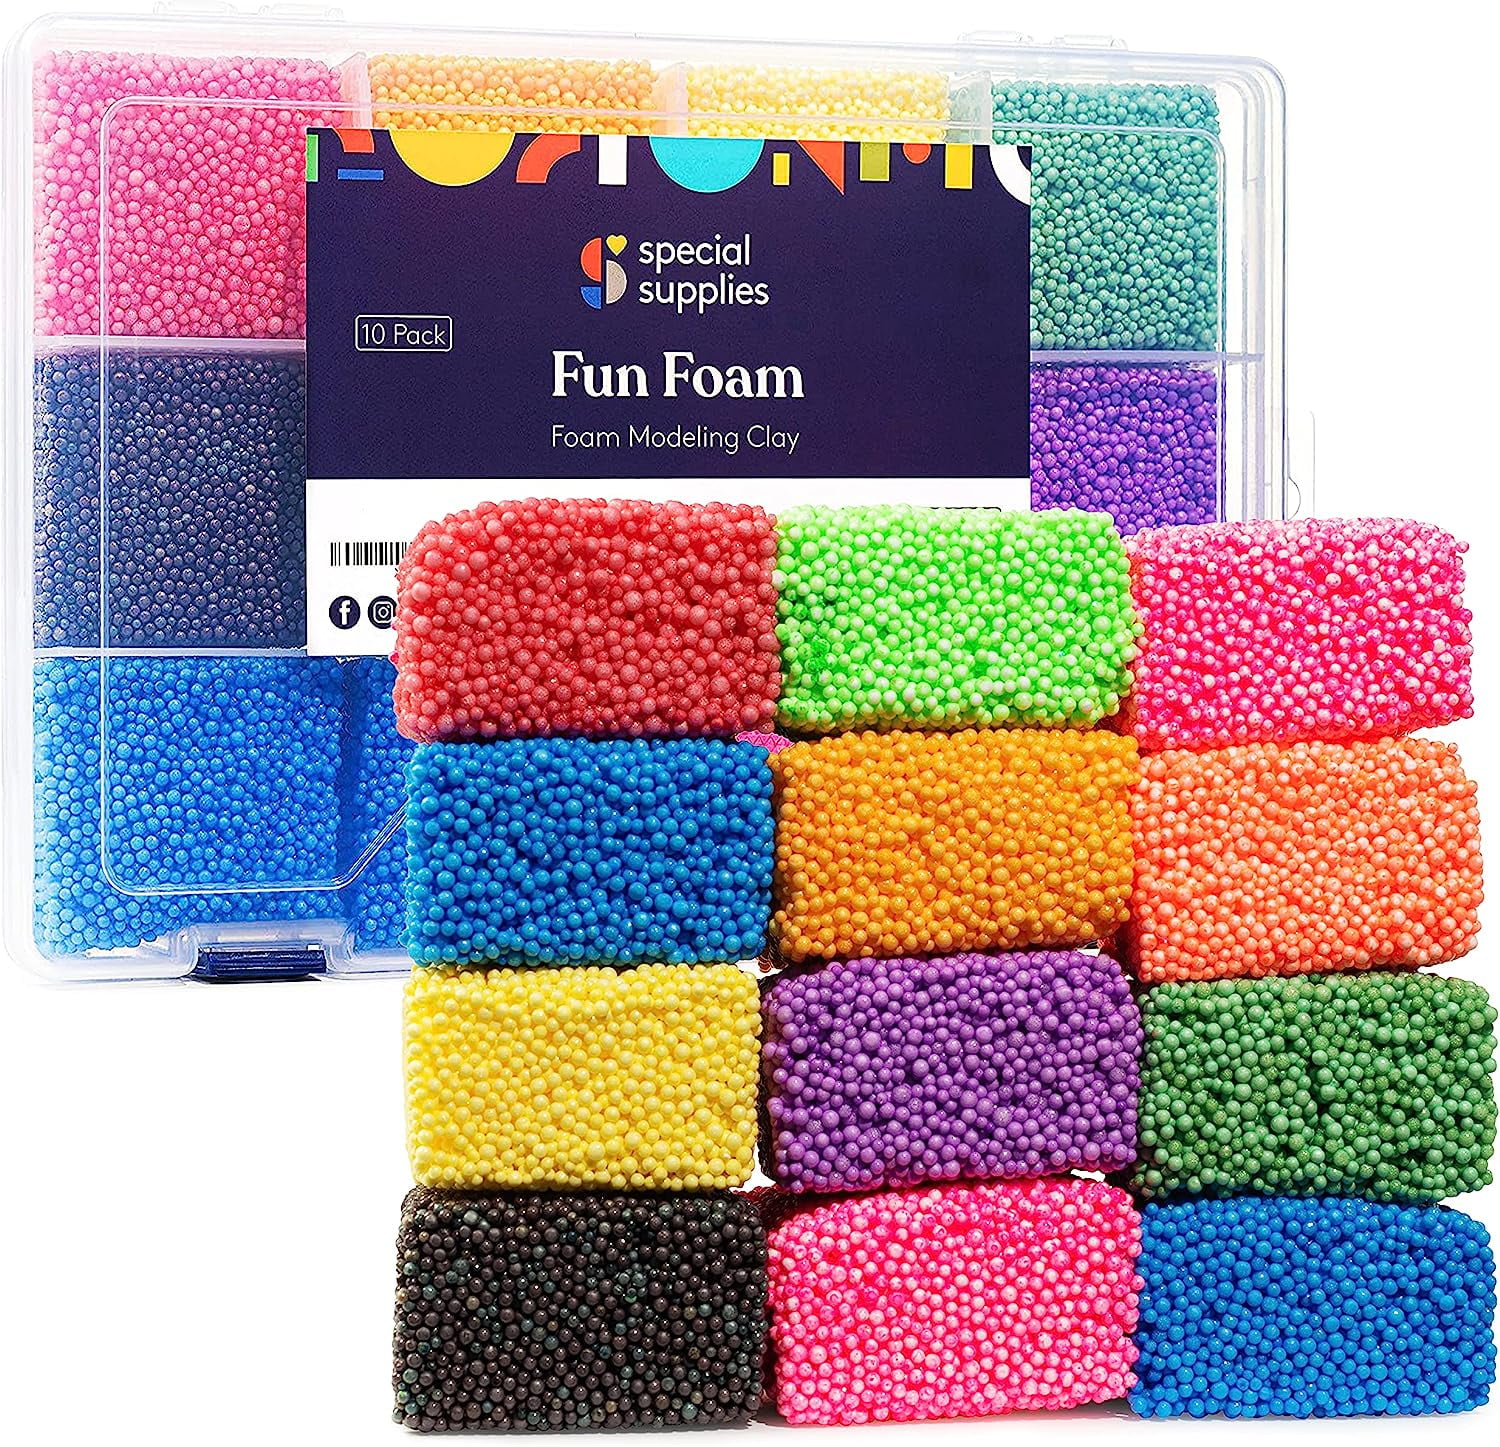  MiKoom Floam 6 PCS Foam Clay Fun Foam for Toddlers Update  Bright Colors Giant Foam Beads Play Kit for Kids, Classroom Educational  Activity Toys Arts Crafts for Boys Girls : Toys